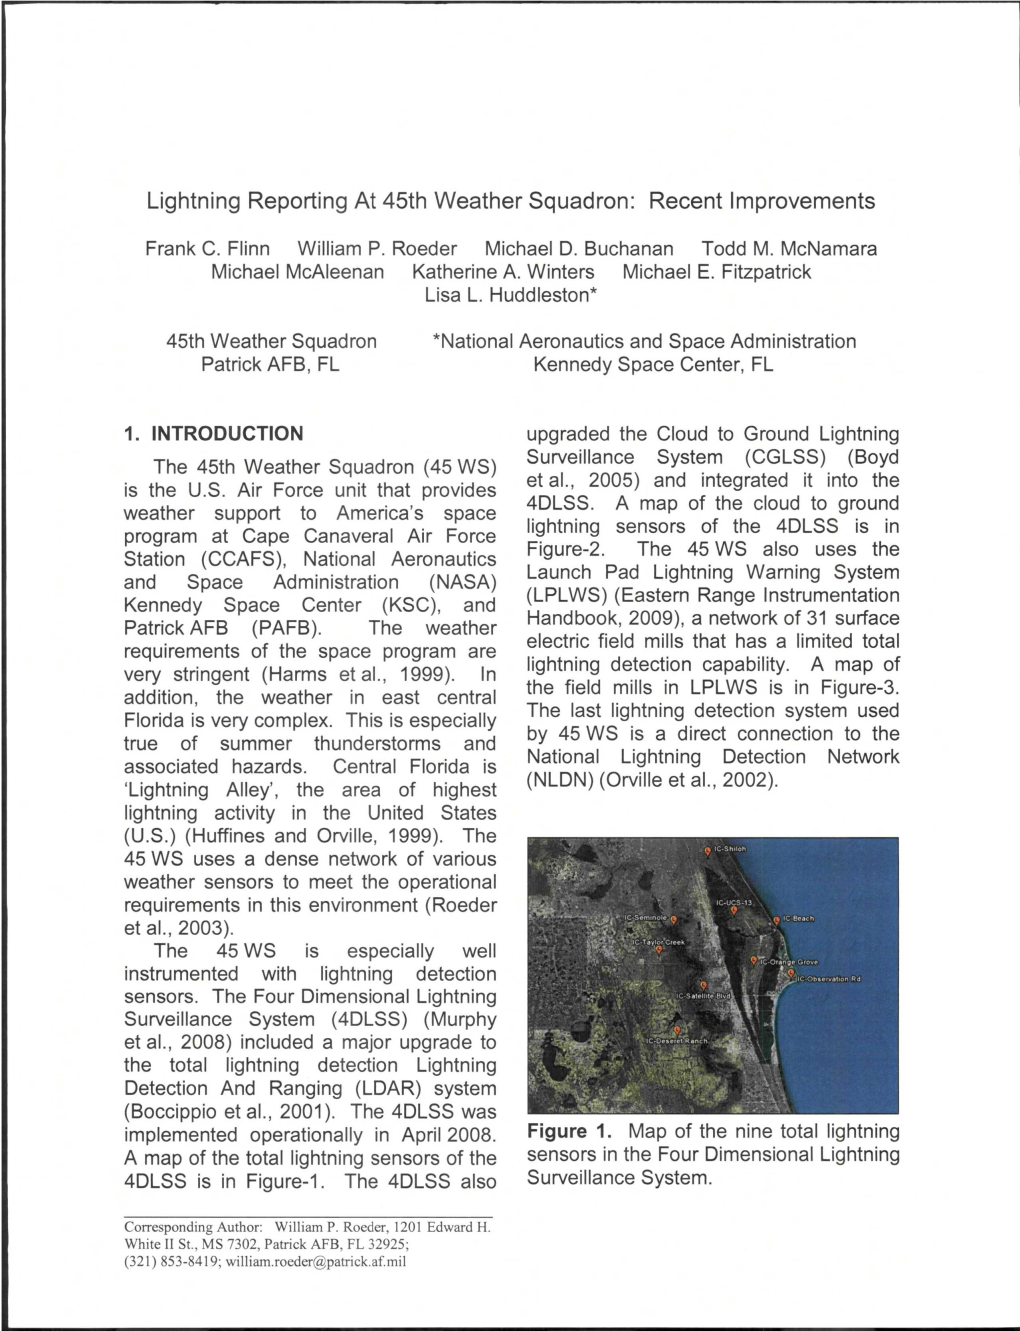 Lightning Reporting at 45Th Weather Squadron: Recent Improvements